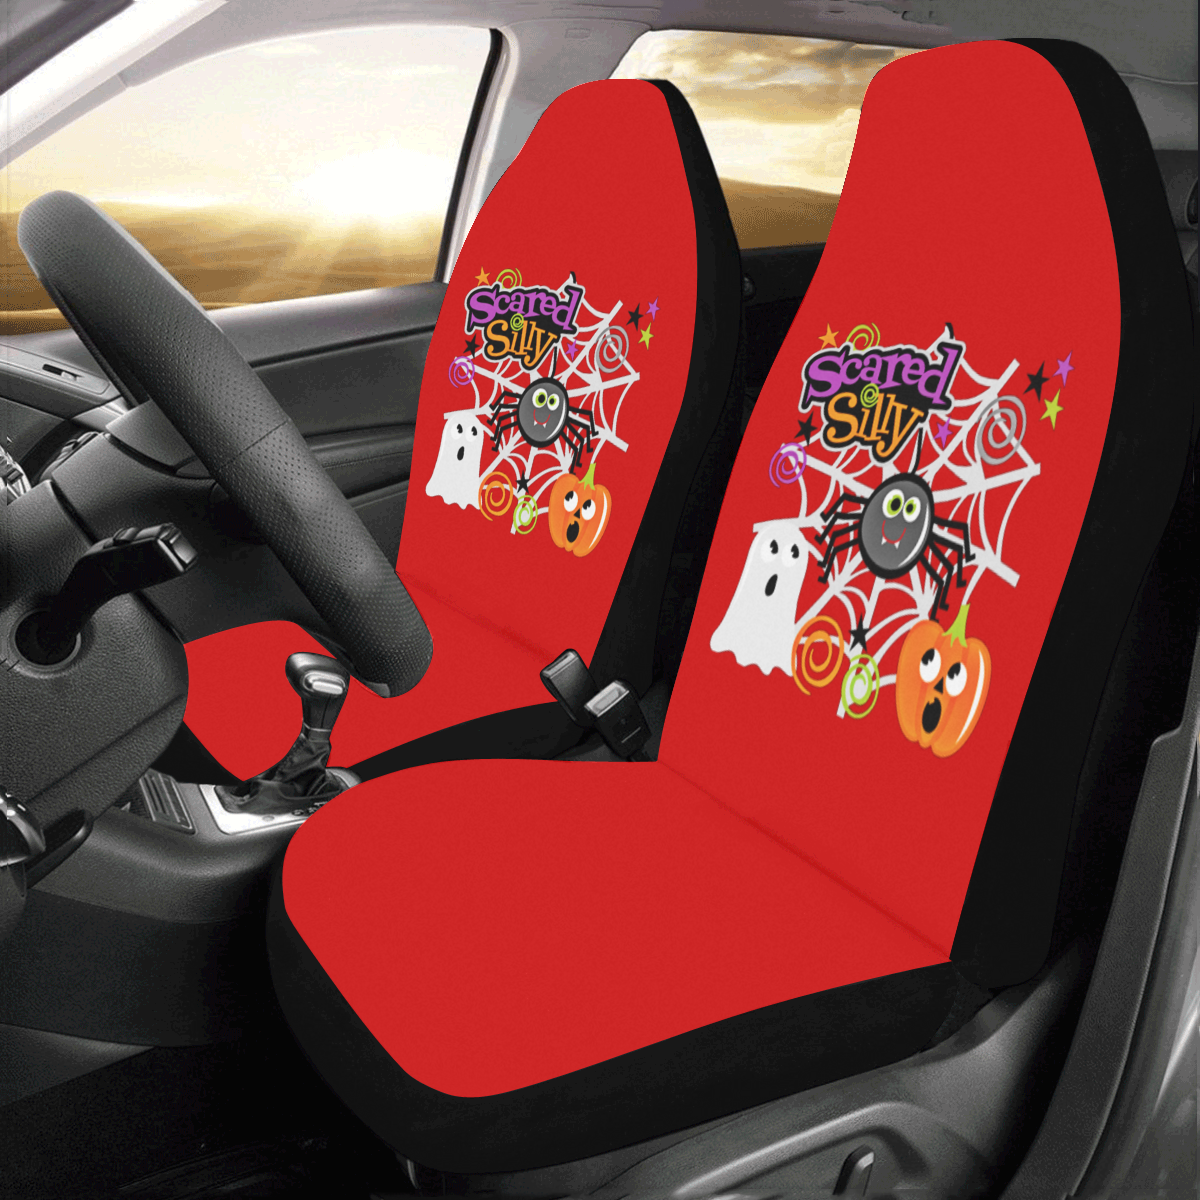 Scared Silly Car Seat Covers (Set of 2)